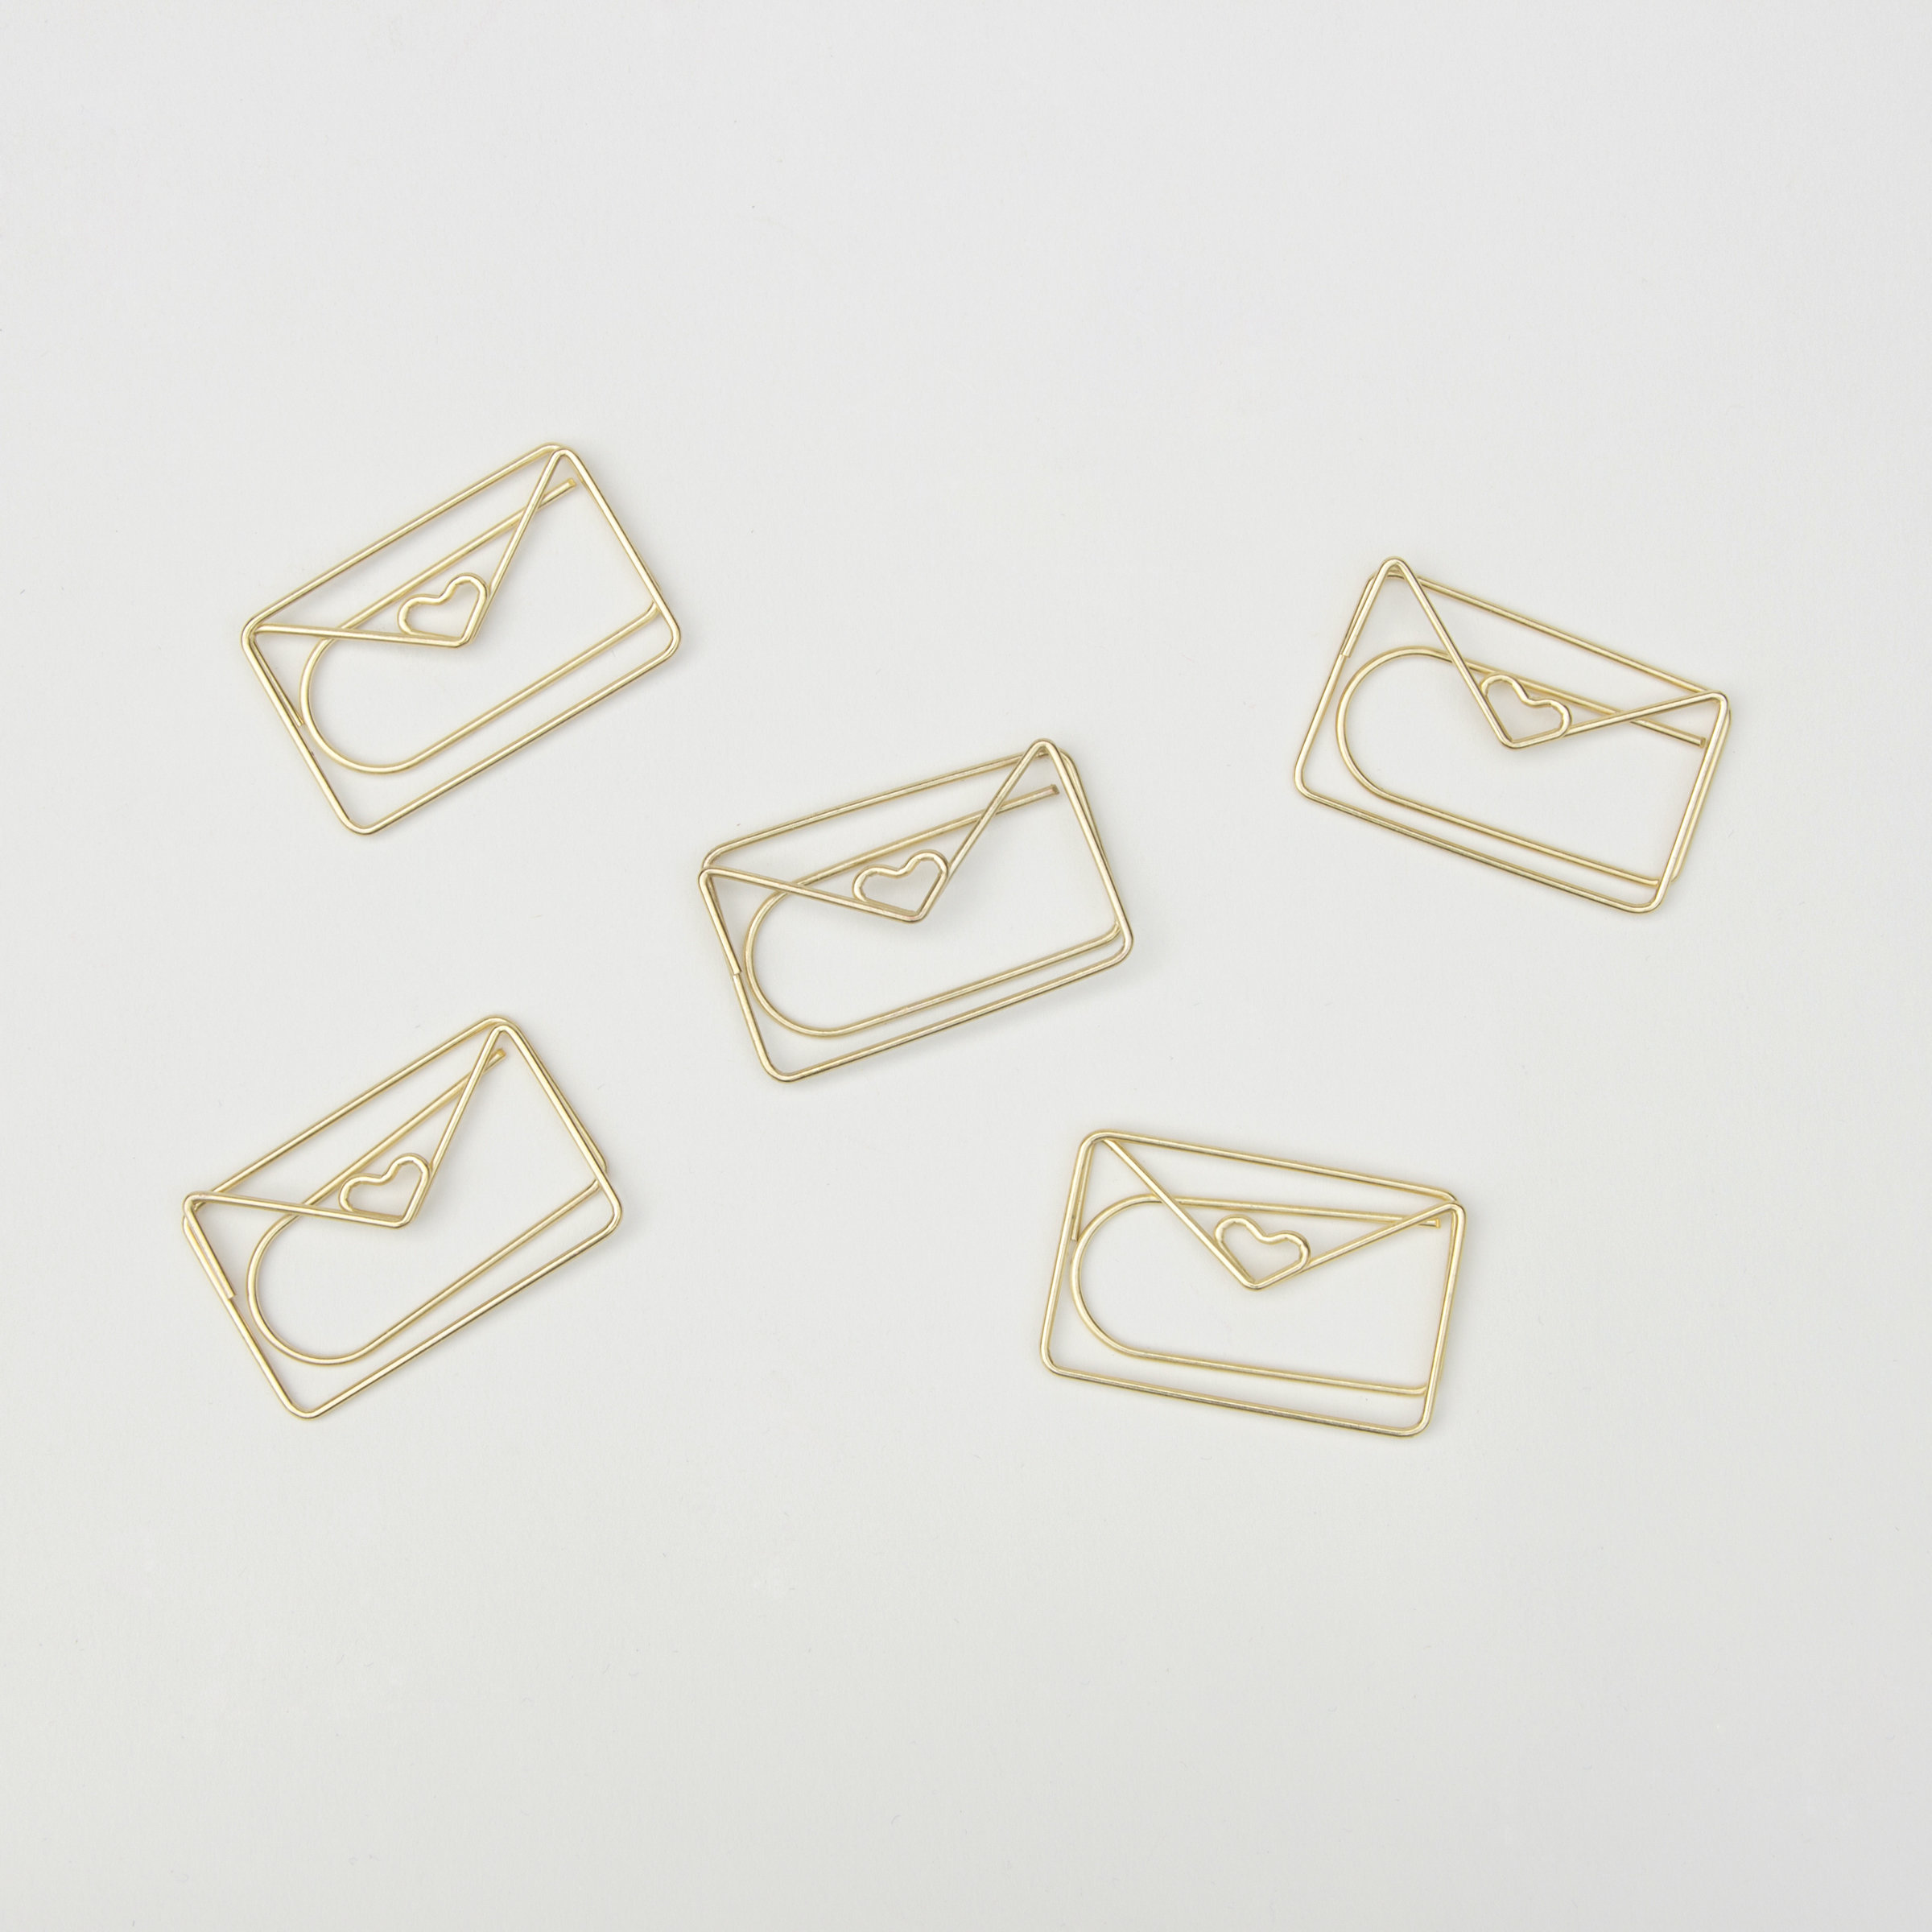 Envelope shaped paper clips in gold